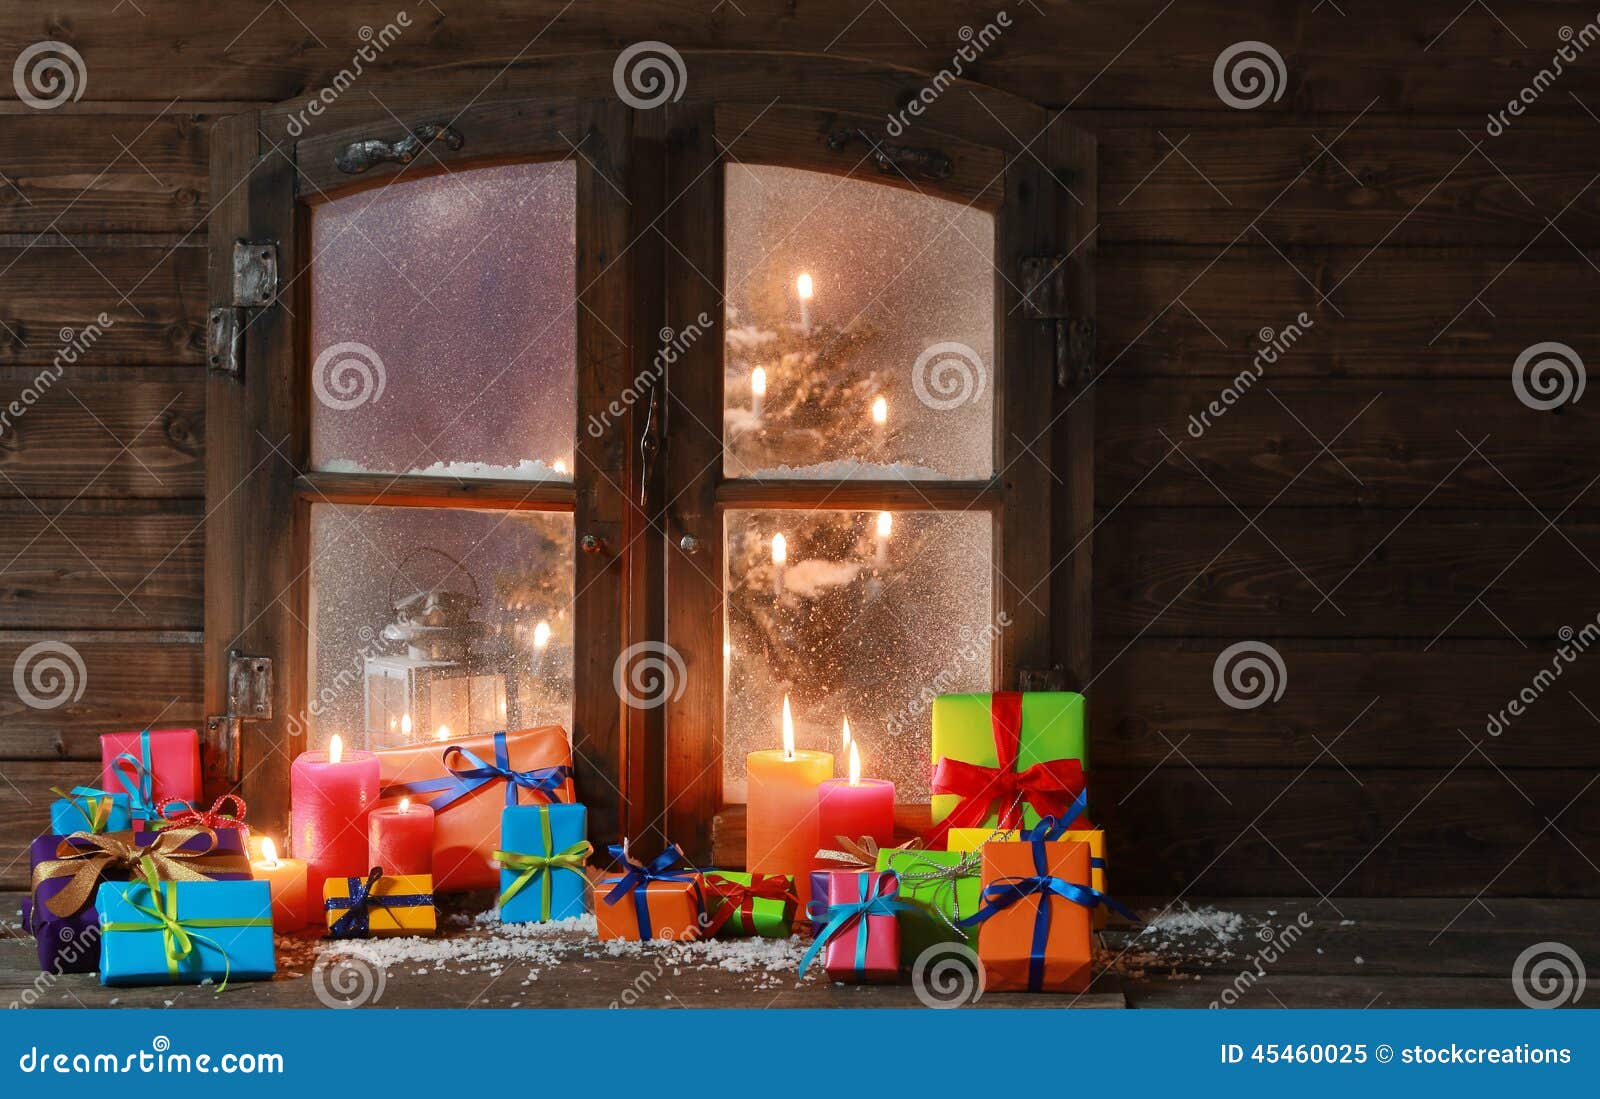 Gift Boxes and Candles at Window on Christmas Stock Image - Image of ...